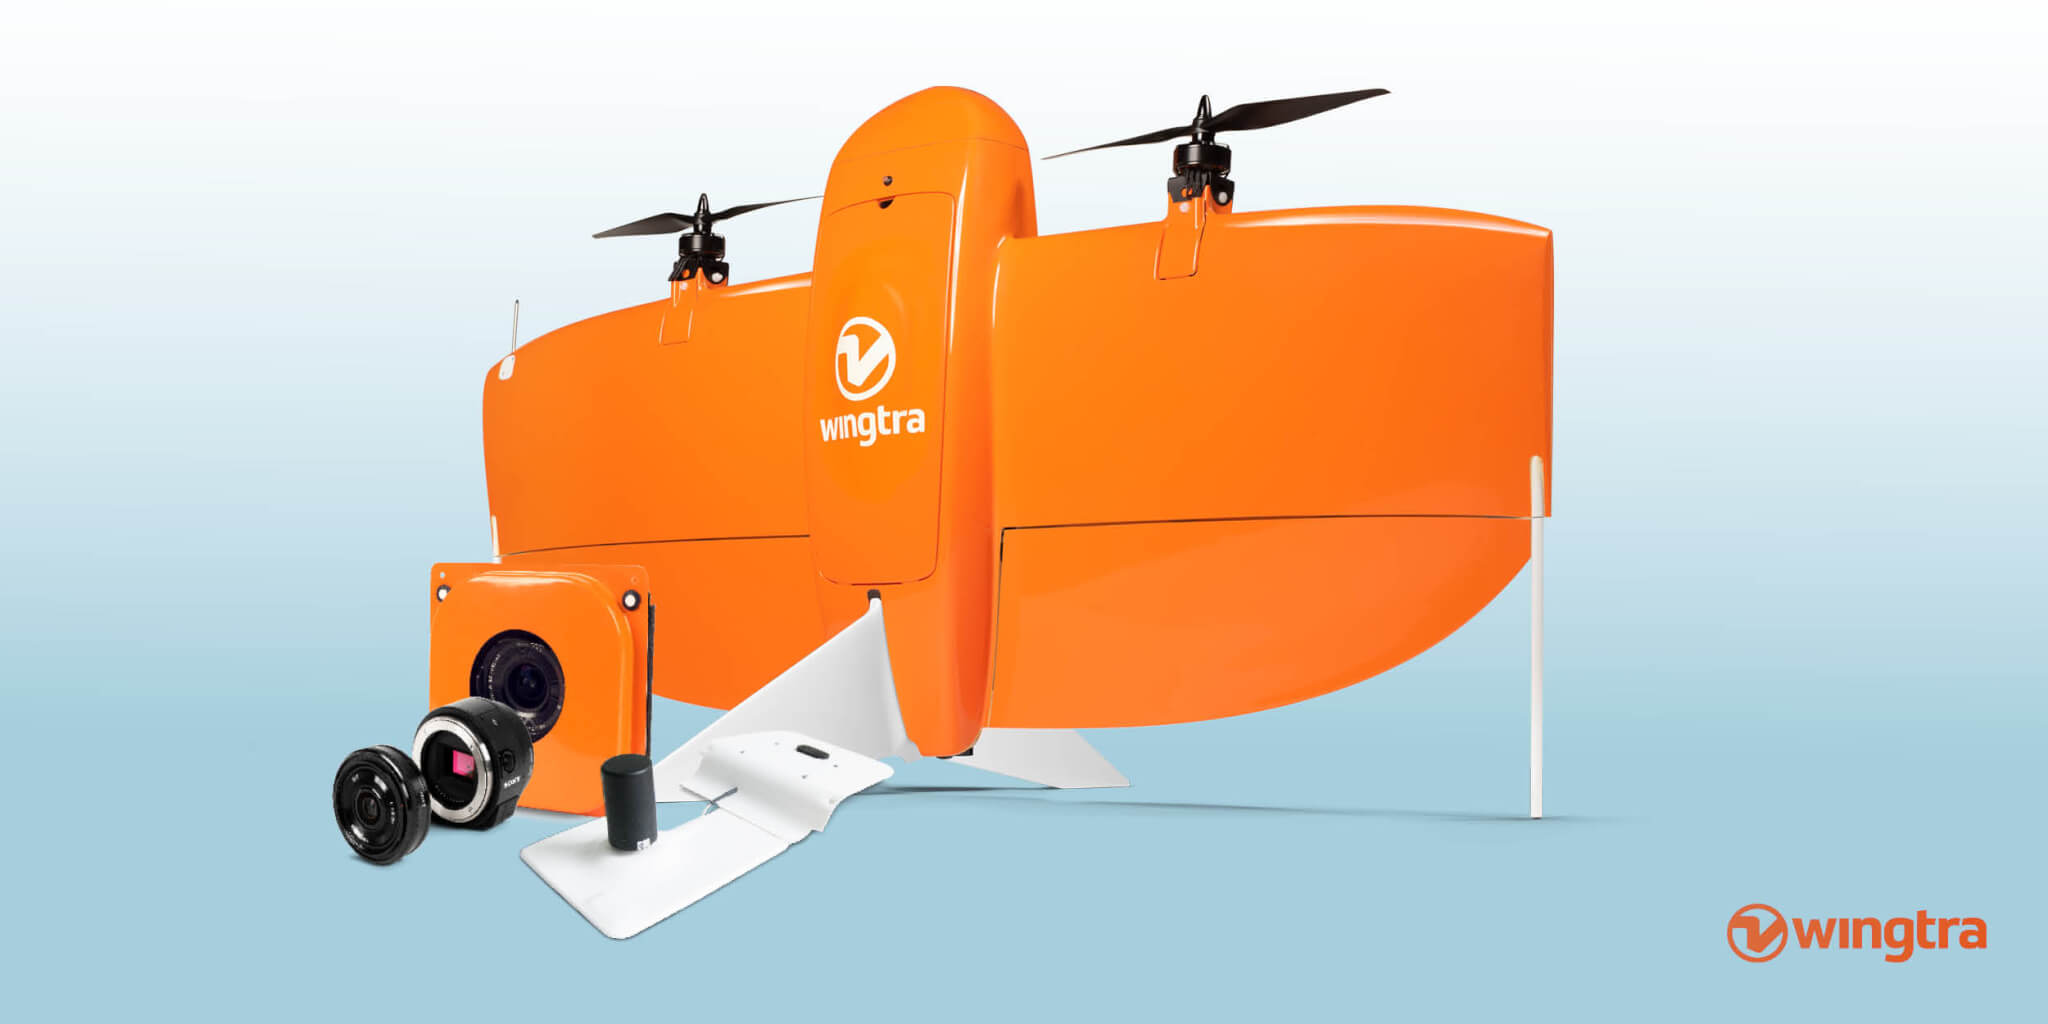 Wingtra launches a more affordable PPK drone bundle | Wingtra